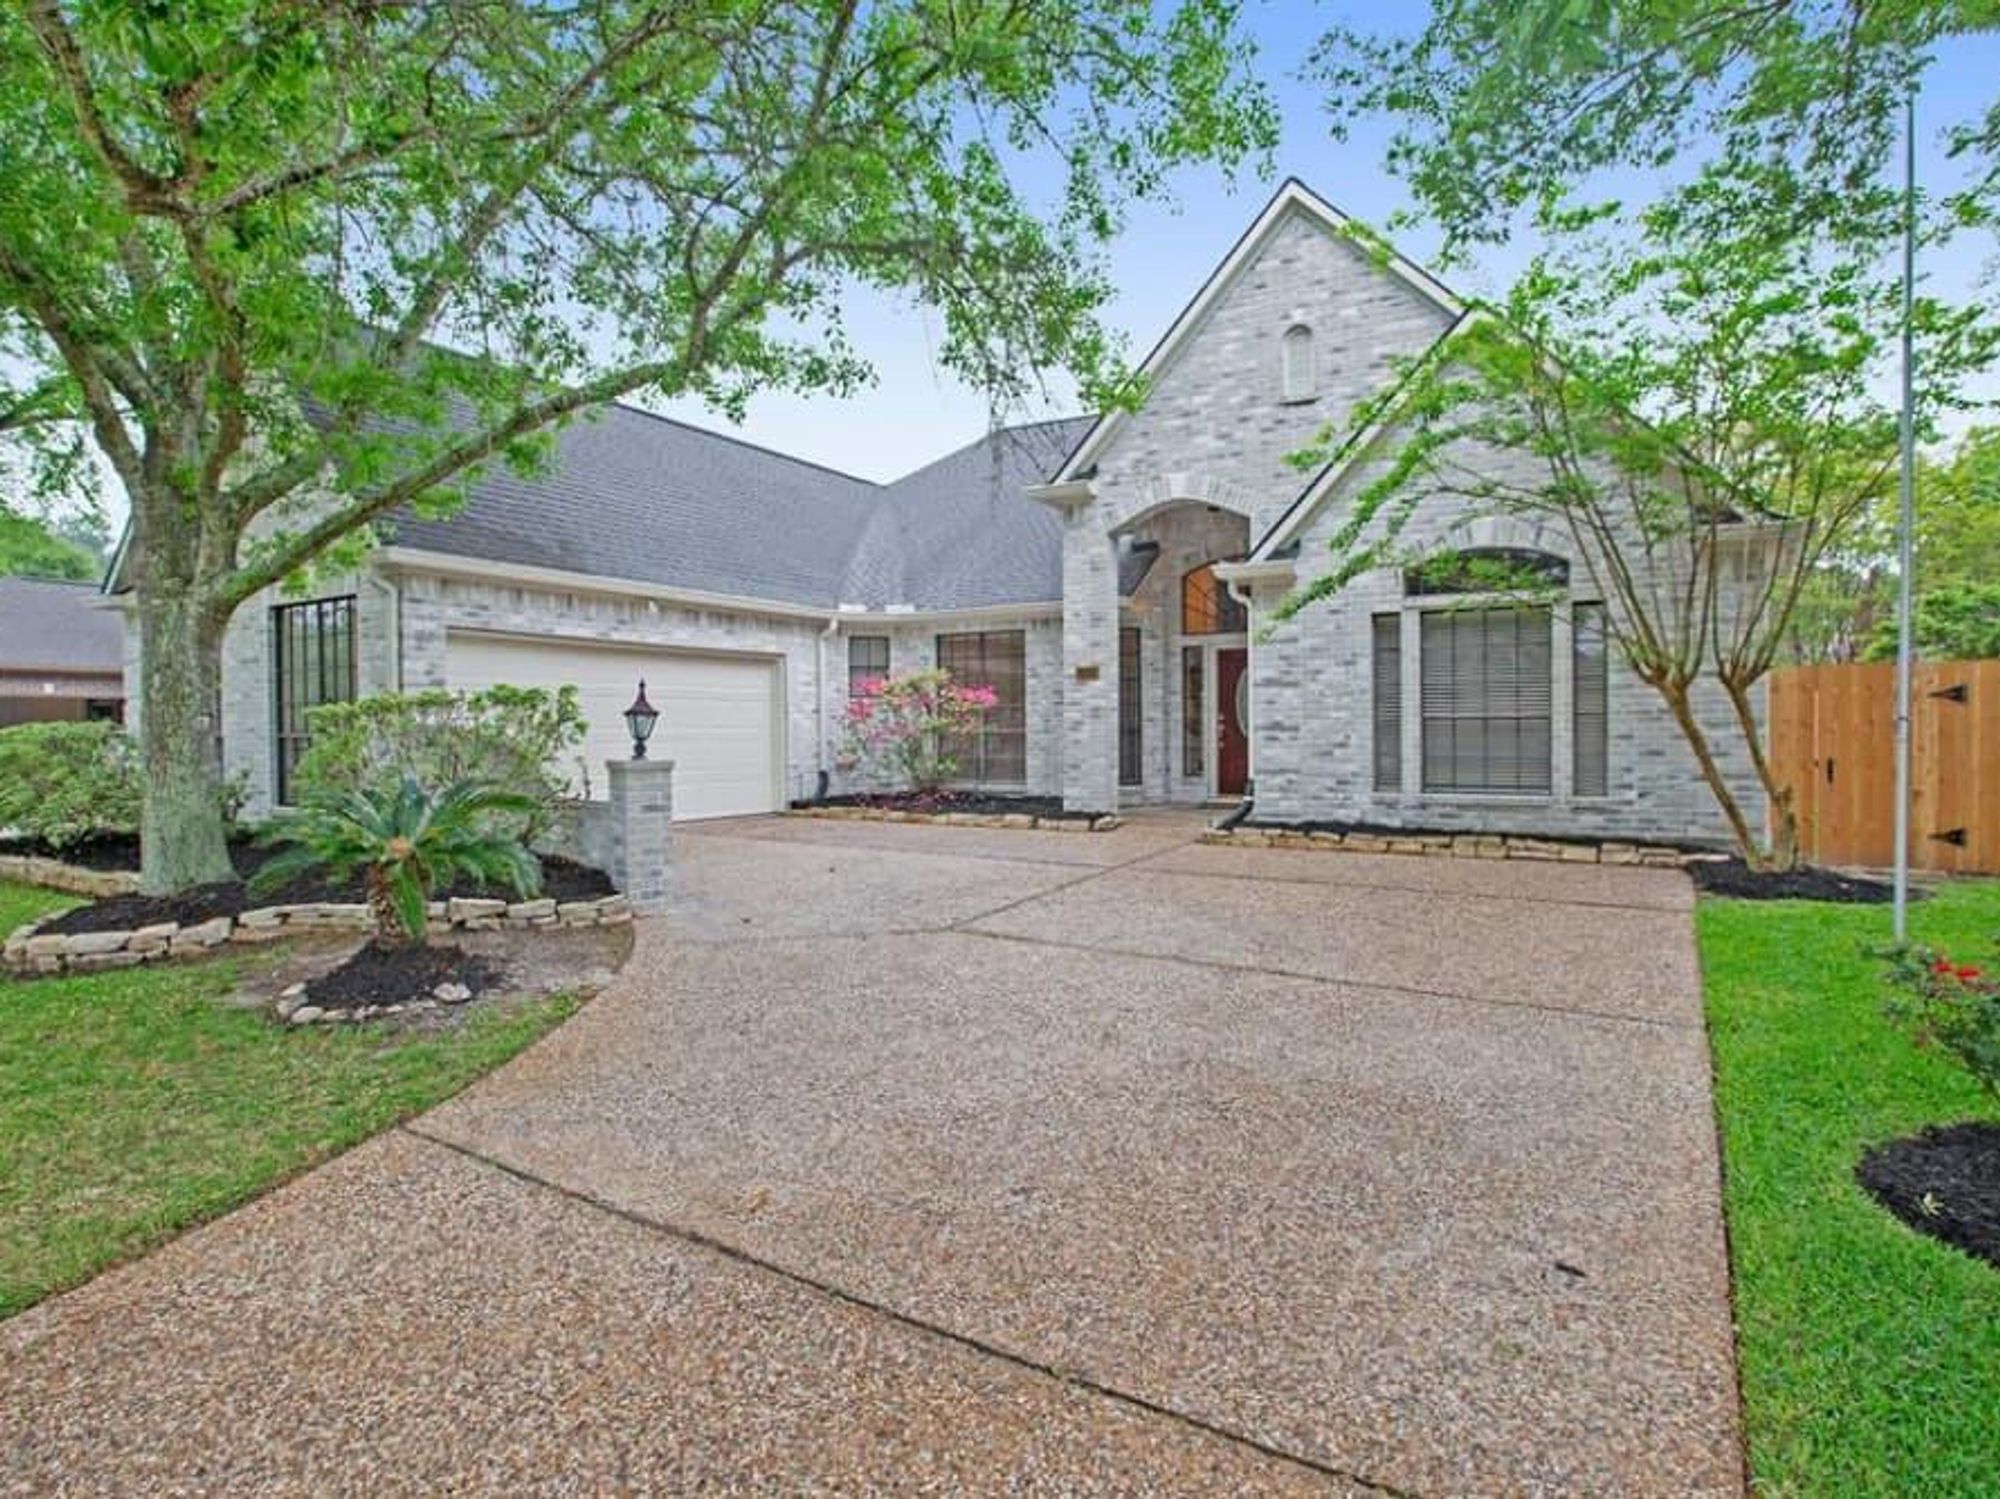 home for sale houston